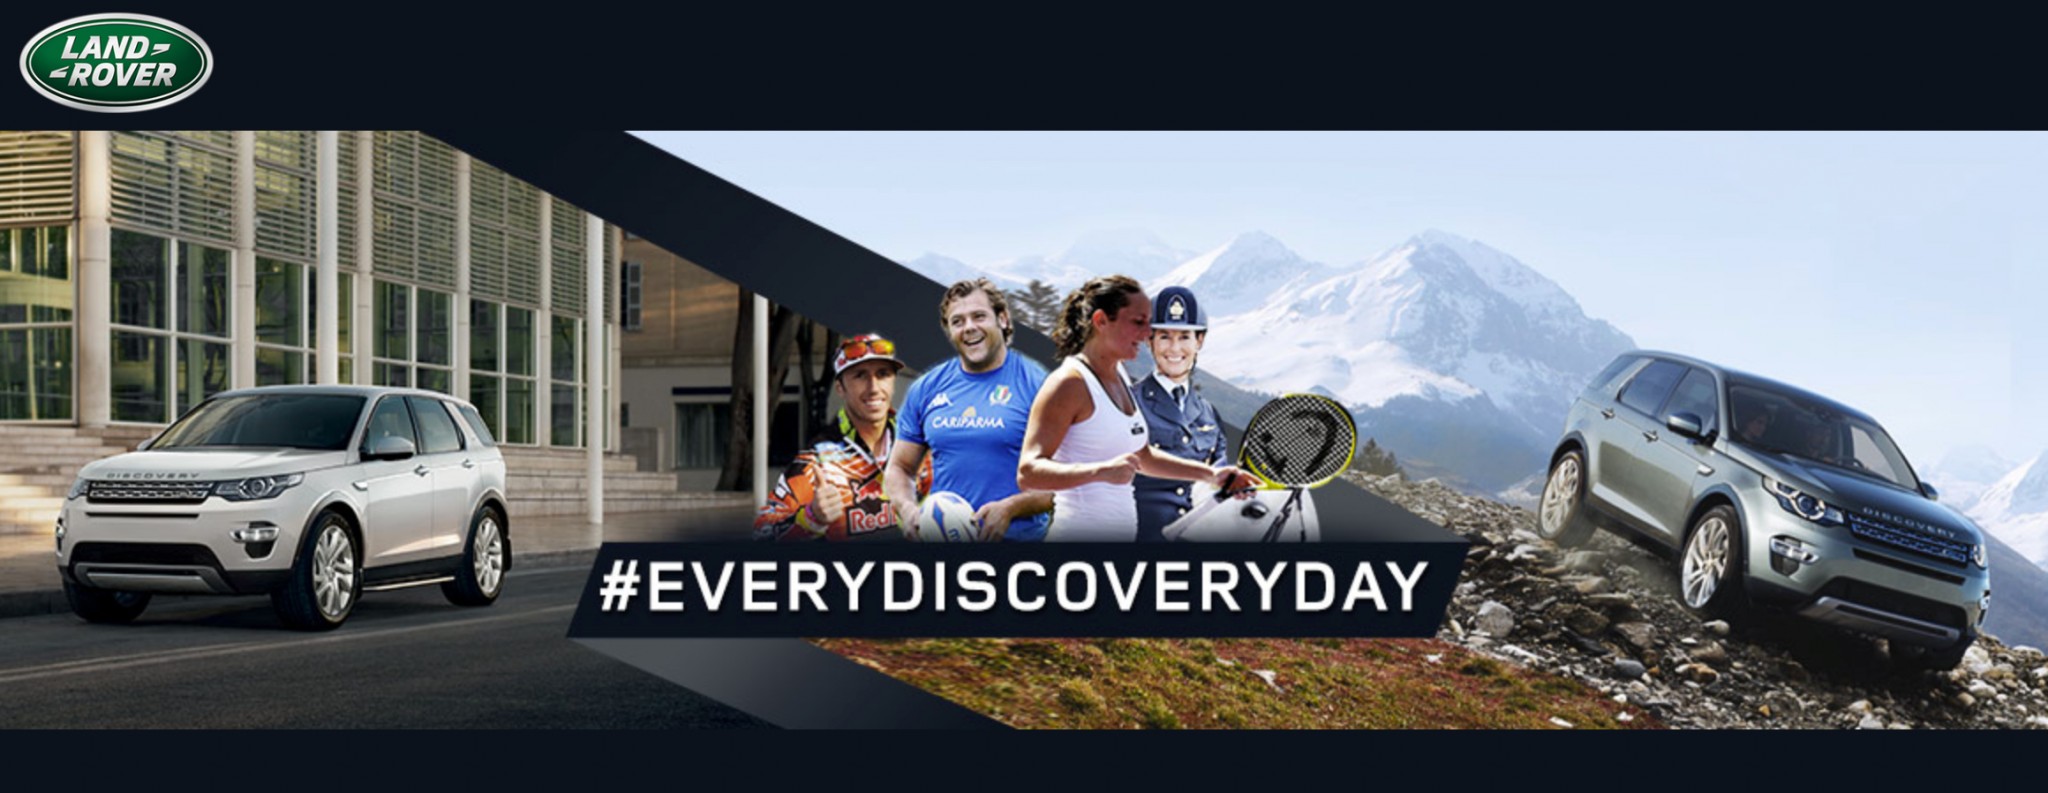 Land Rover, Every Discovery Day